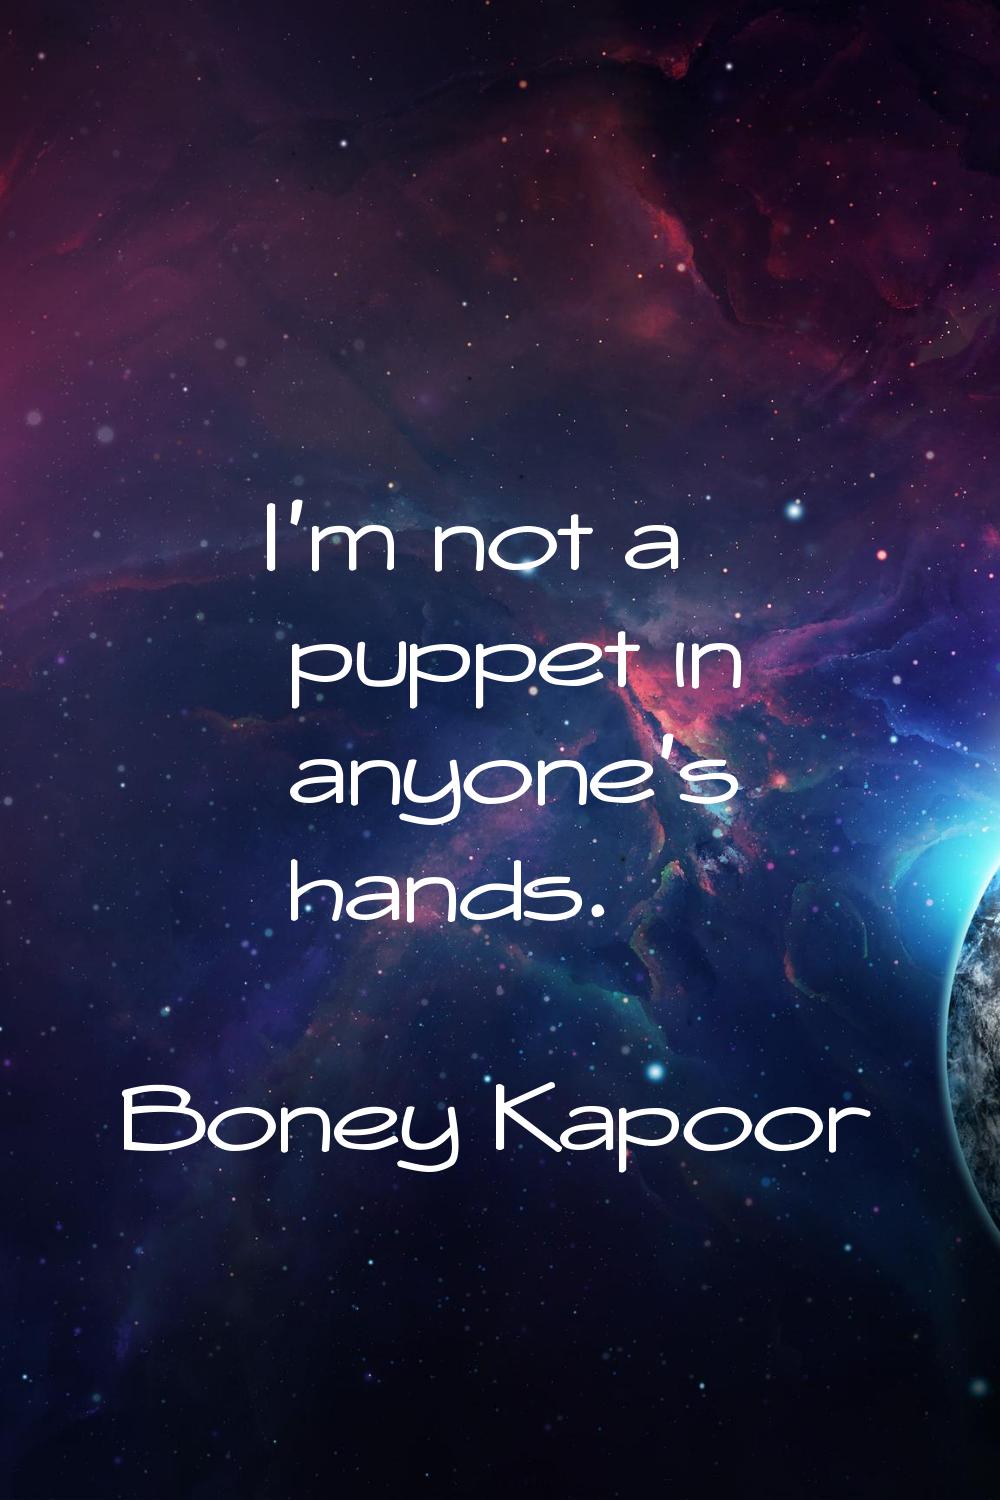 I'm not a puppet in anyone's hands.